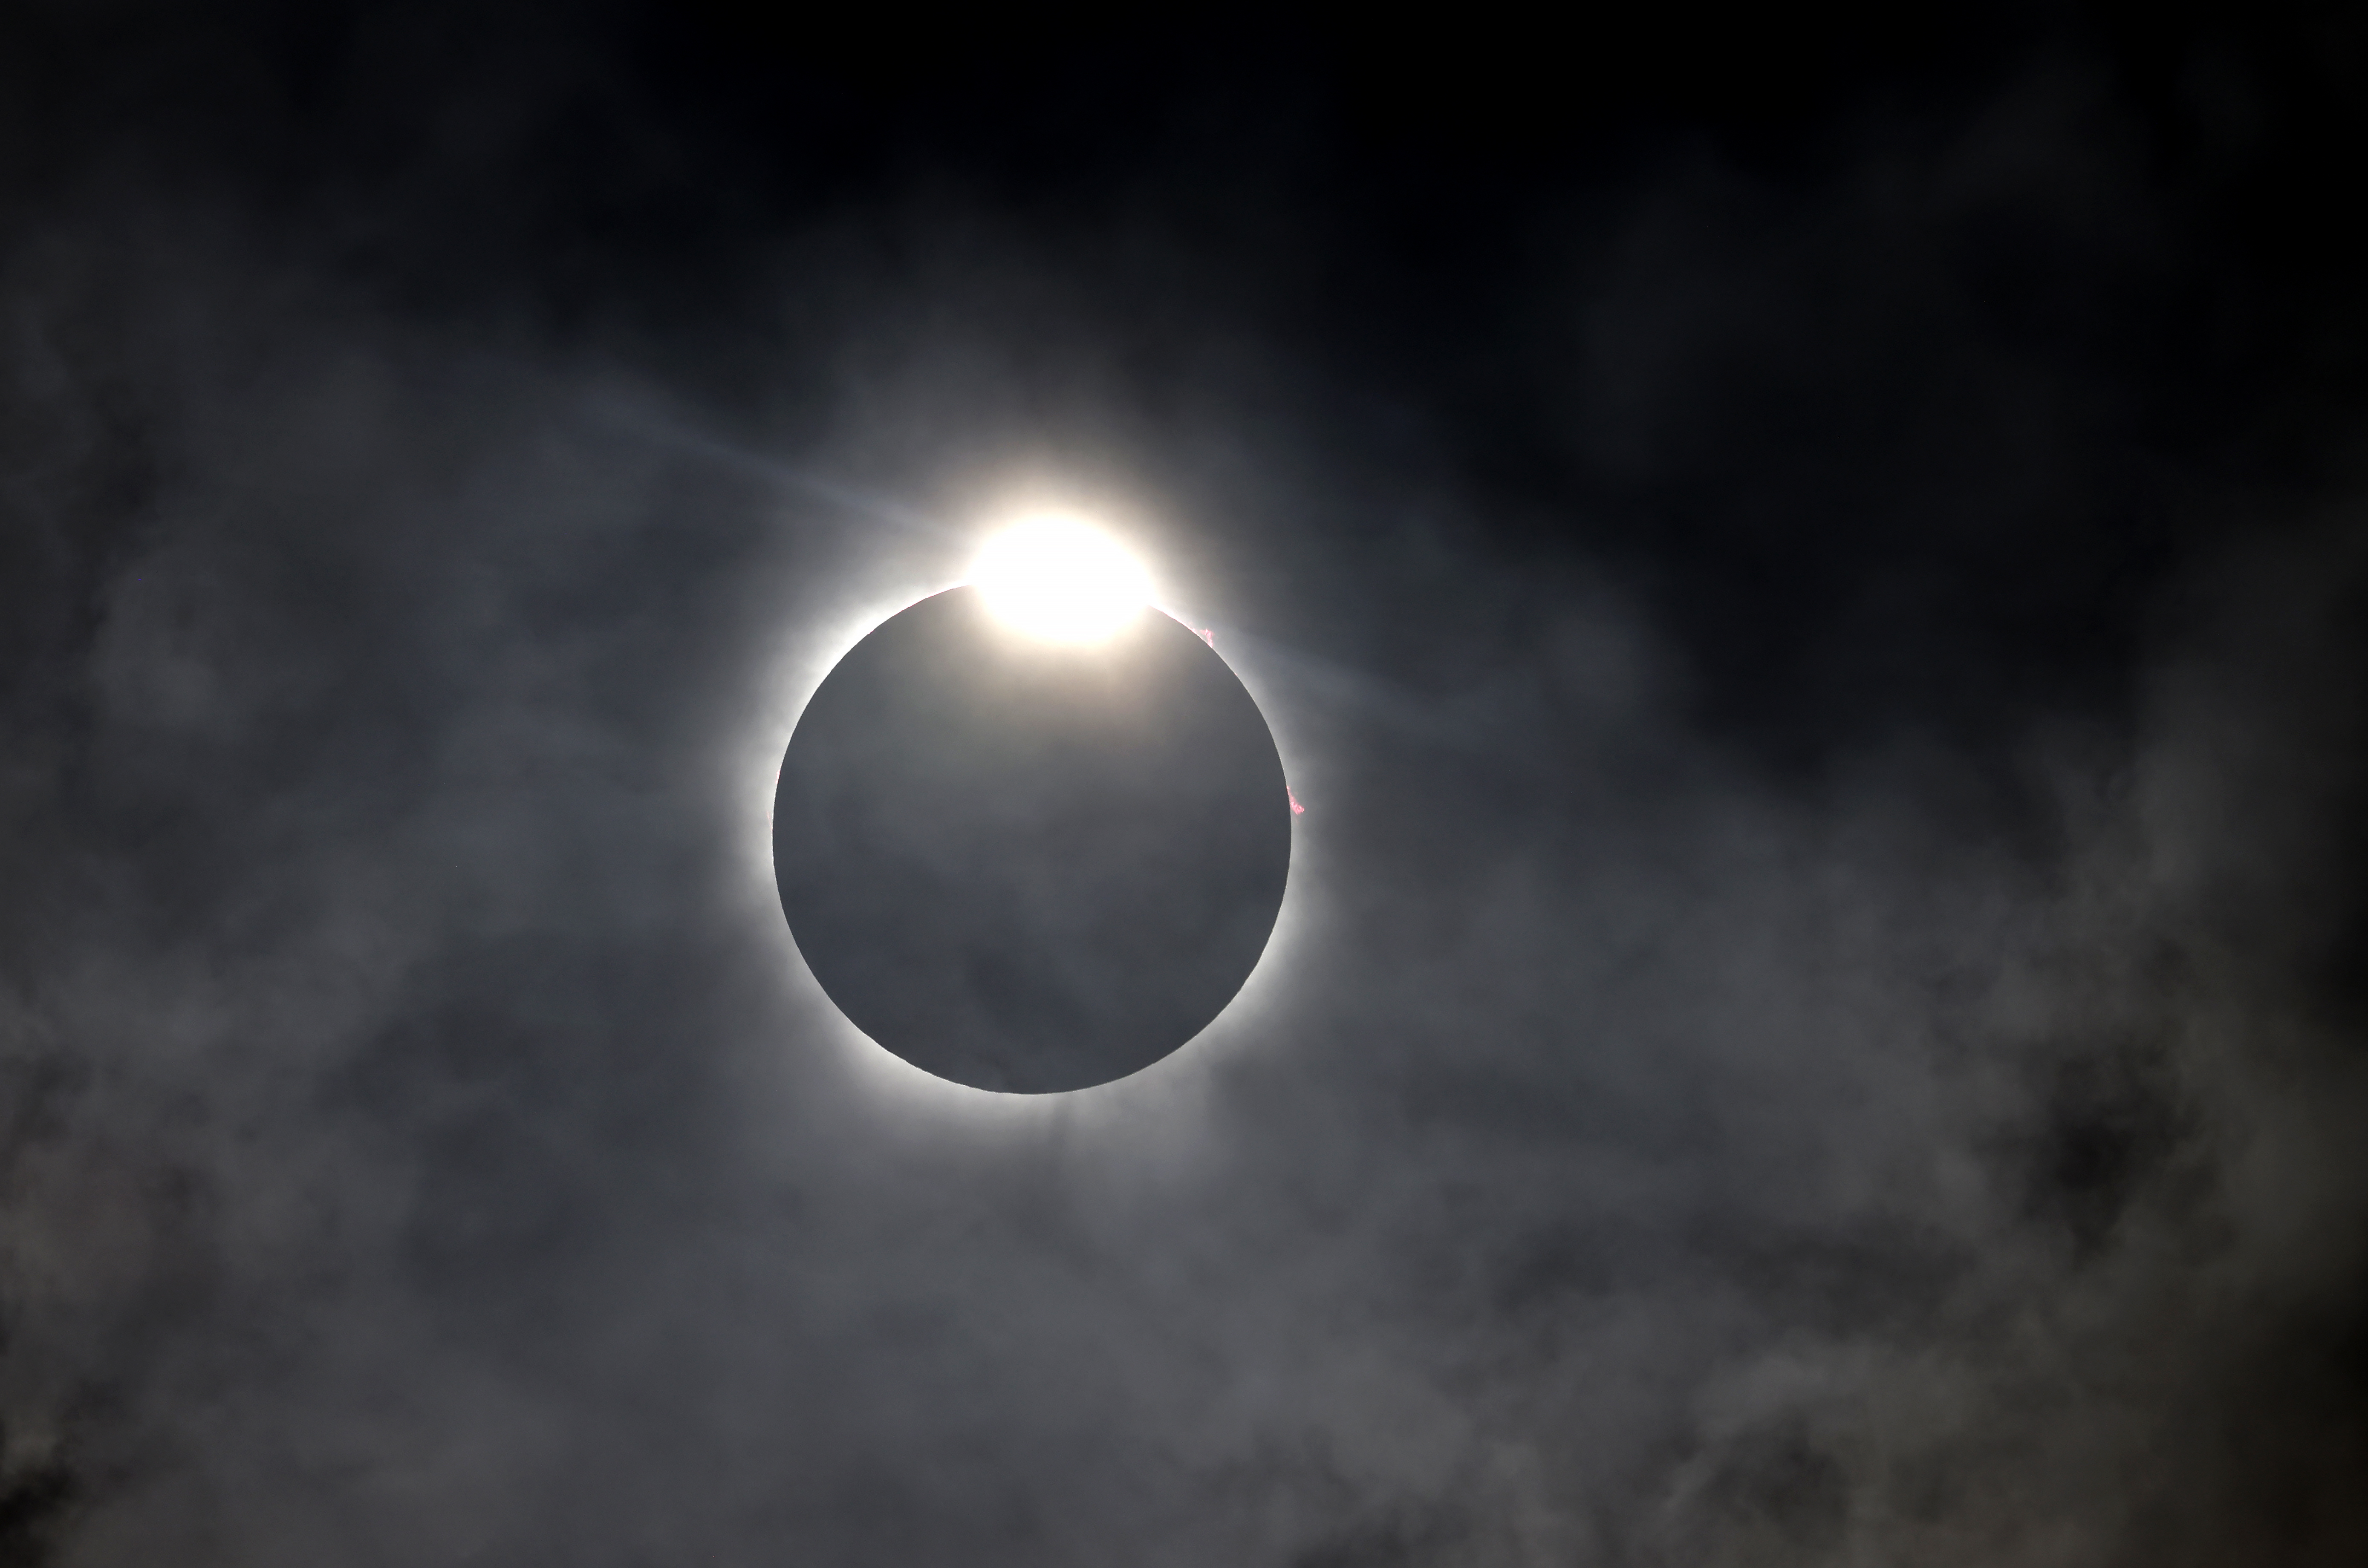 The diamond ring effect is seen when the moon blocks the sun over Fort Worth, Texas.